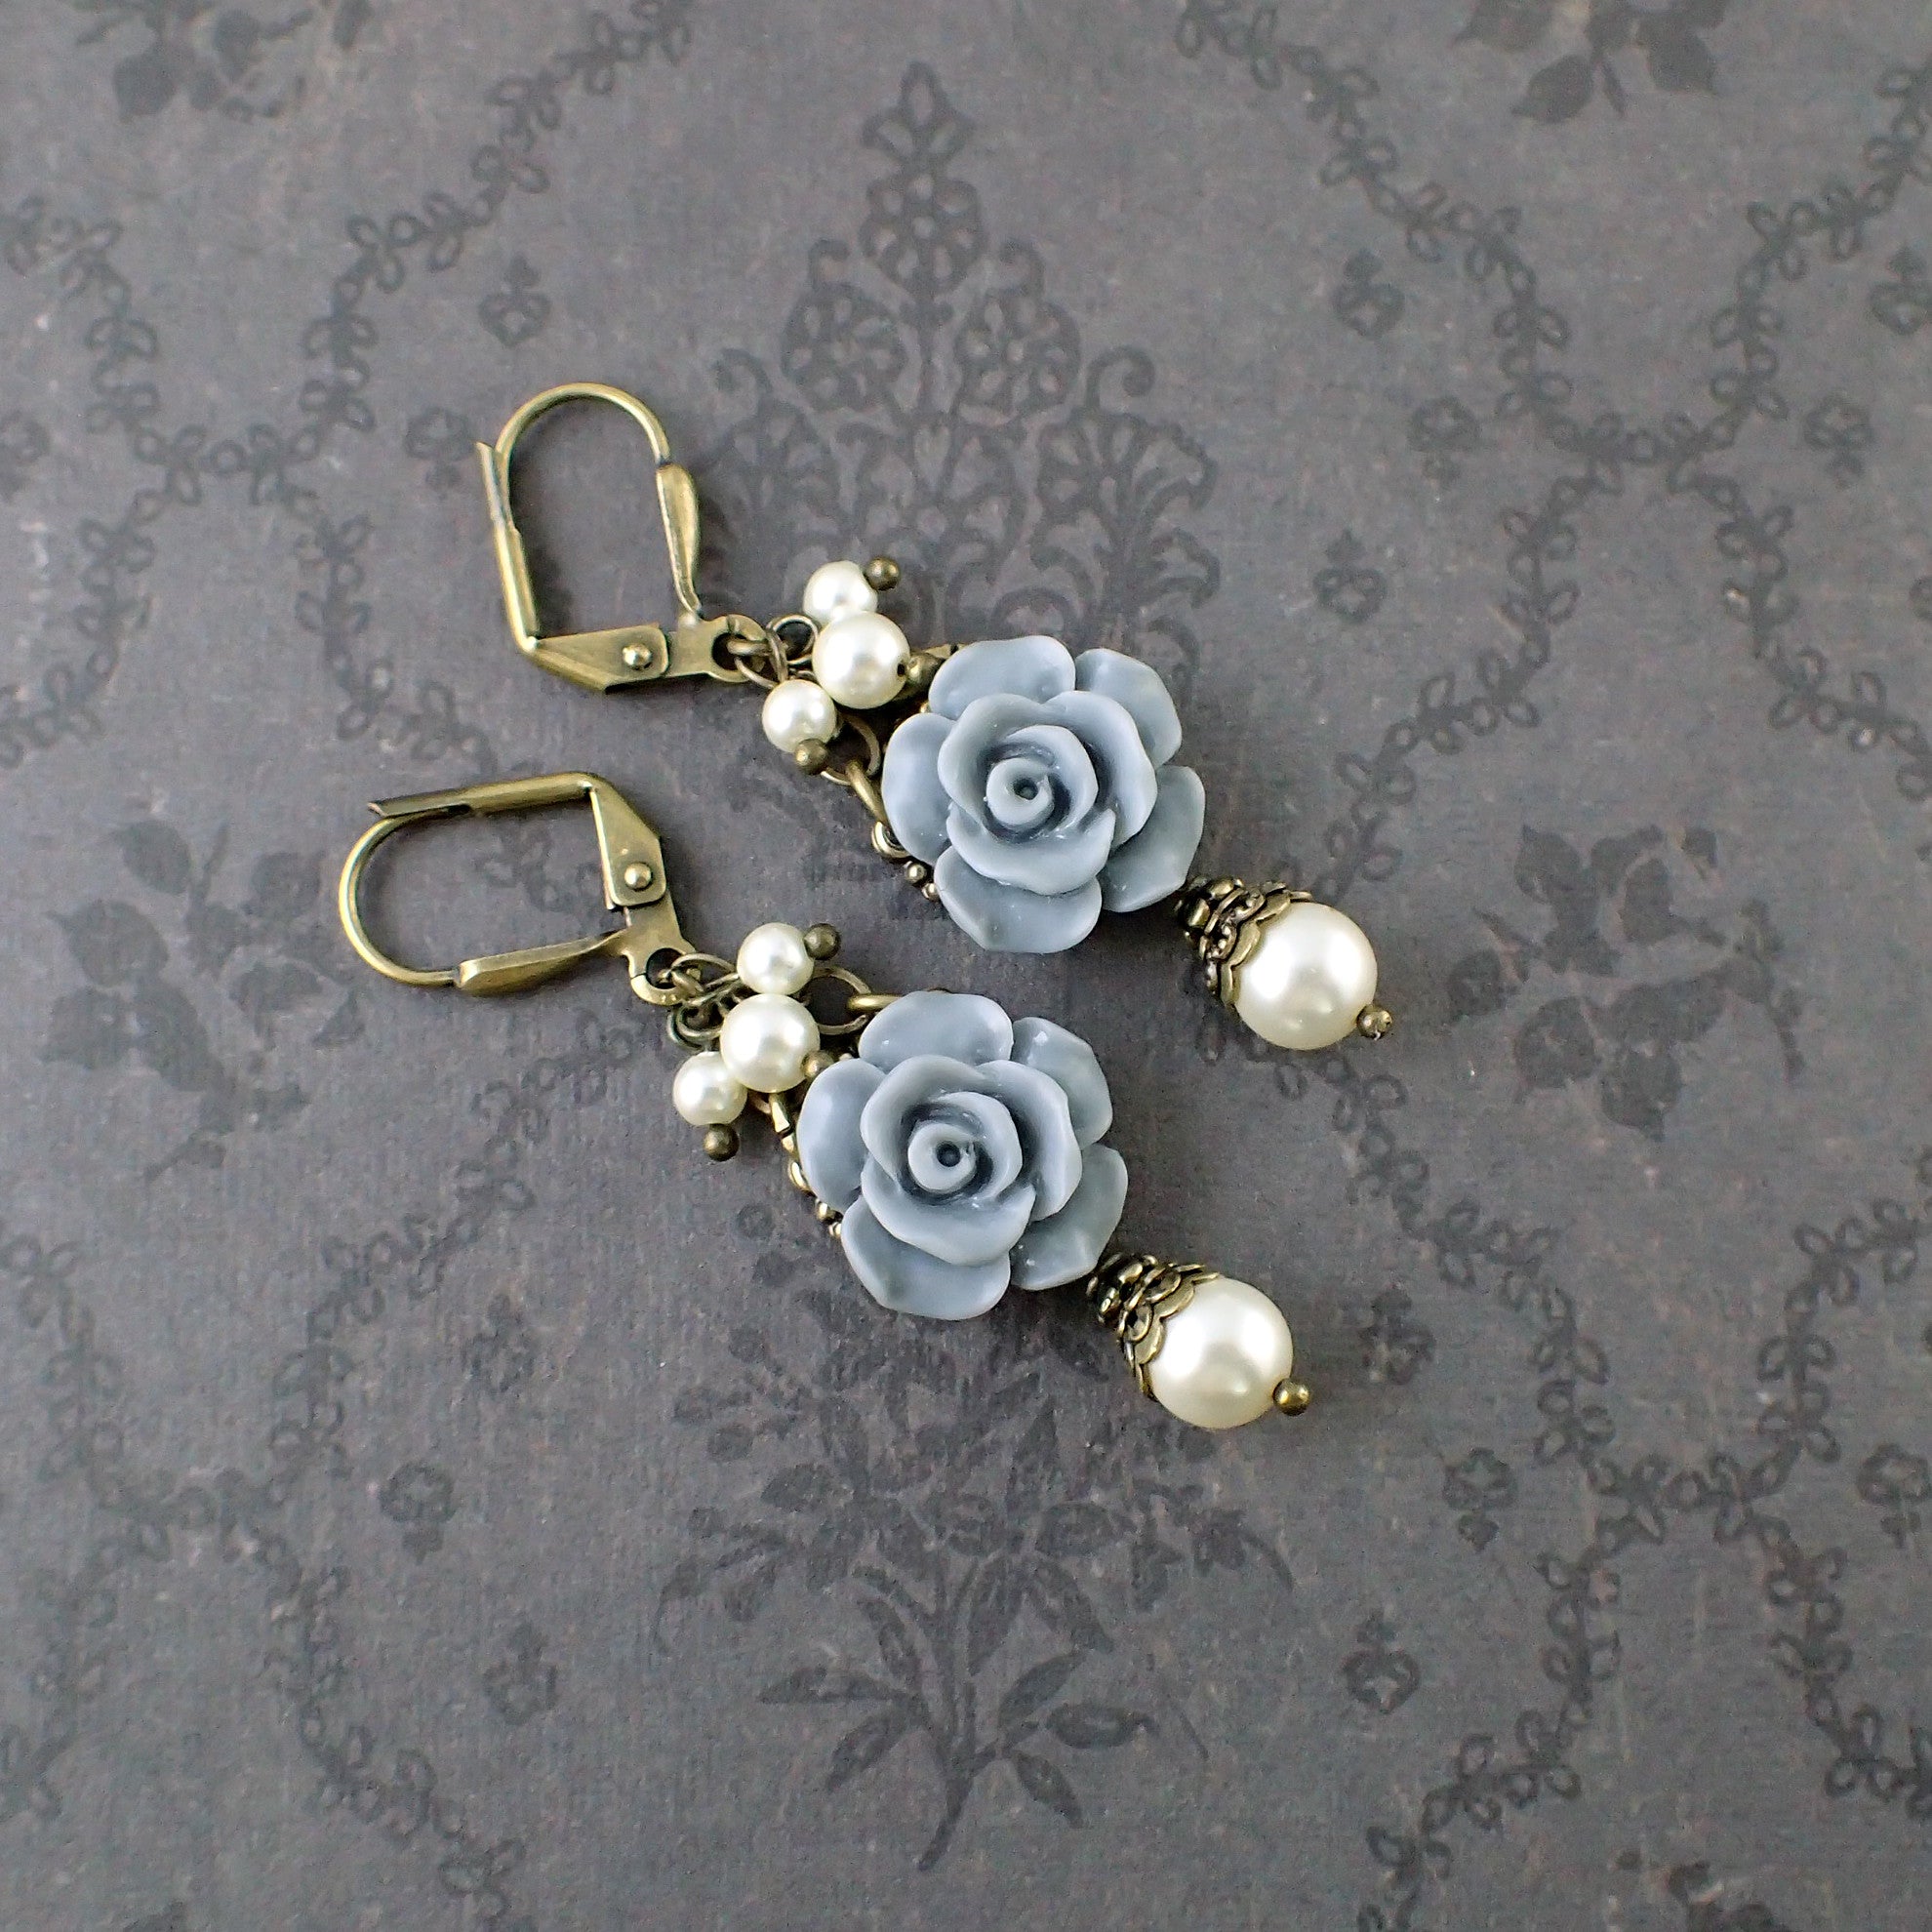 Dusty Blue and Ivory Shabby Rose Earrings